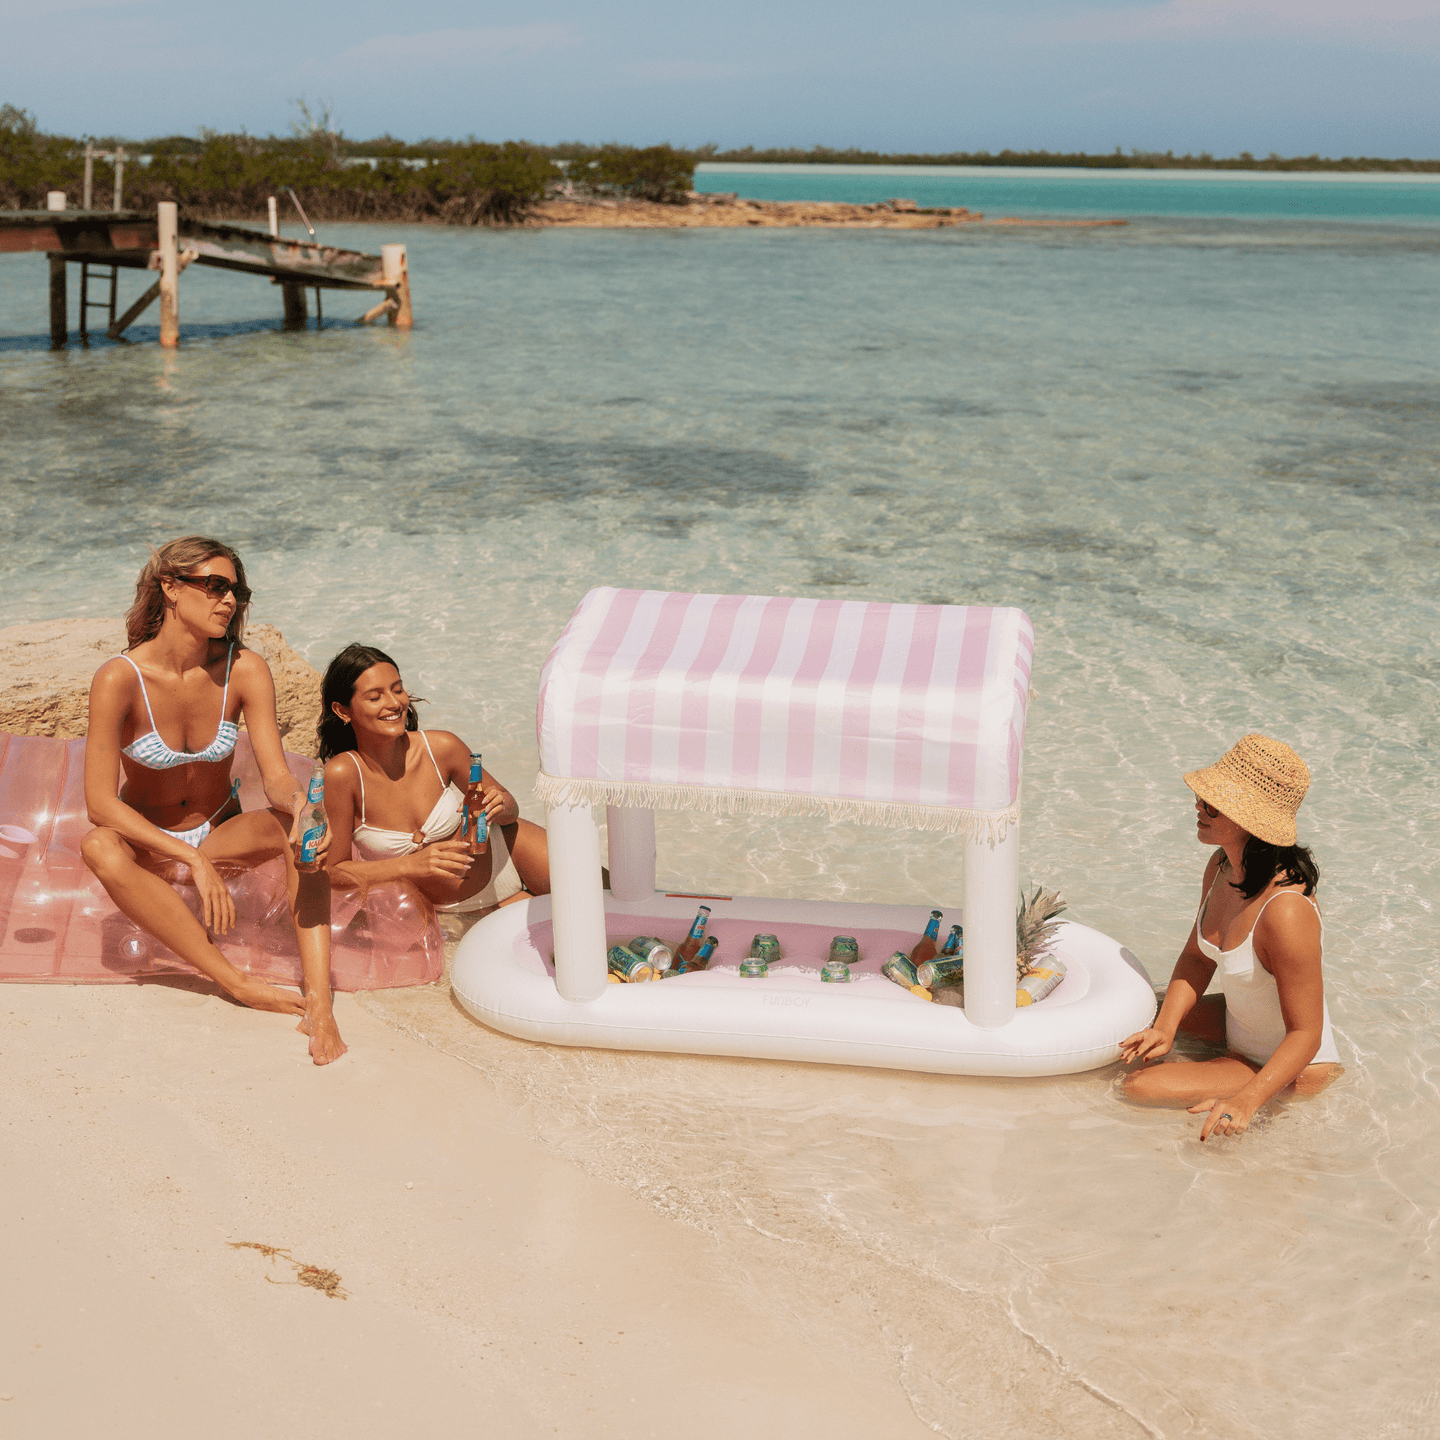 Inflatable Floating Bar - Pink & White Striped